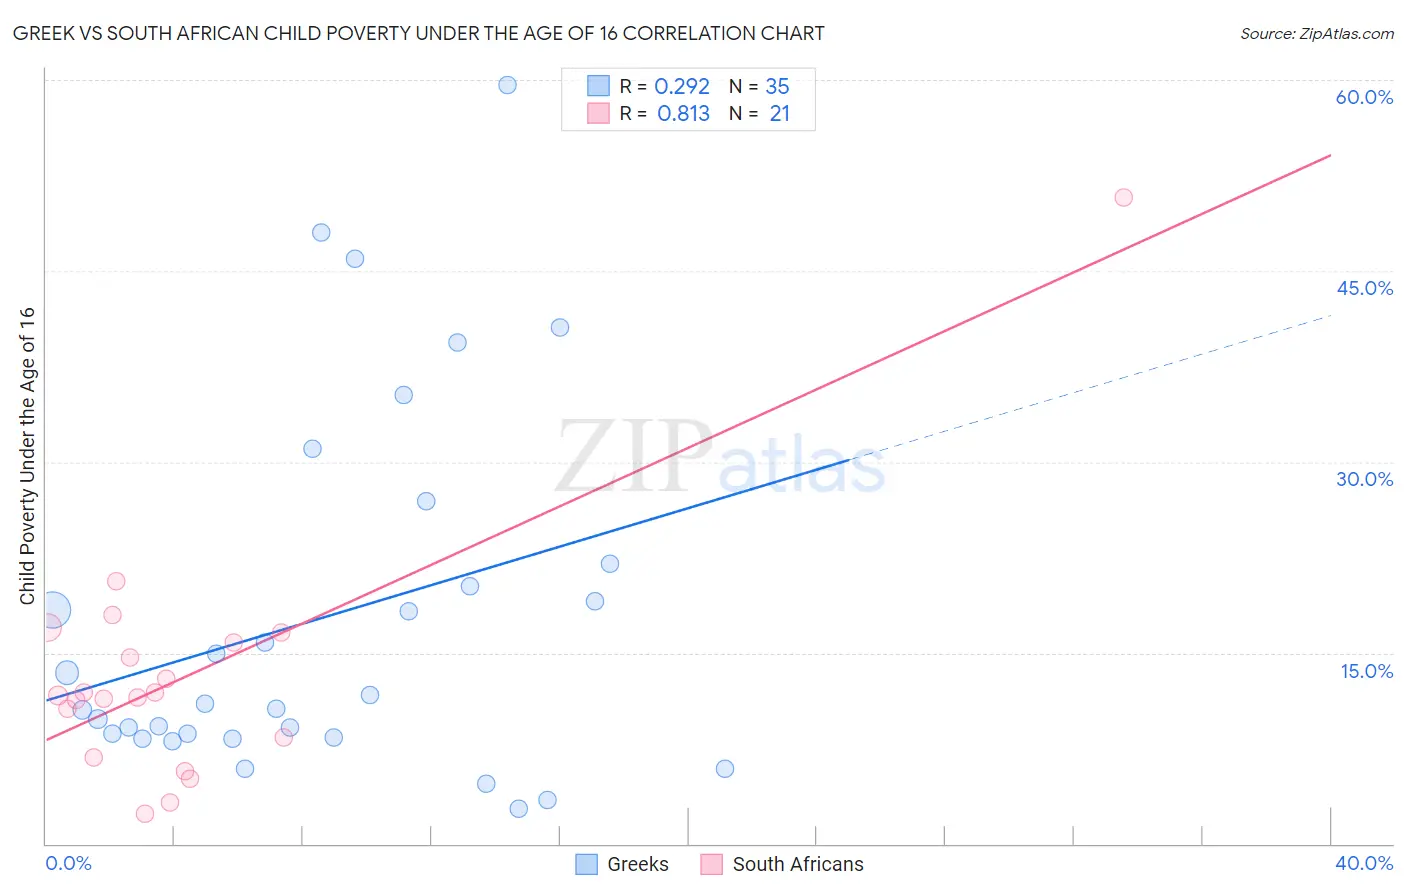 Greek vs South African Child Poverty Under the Age of 16